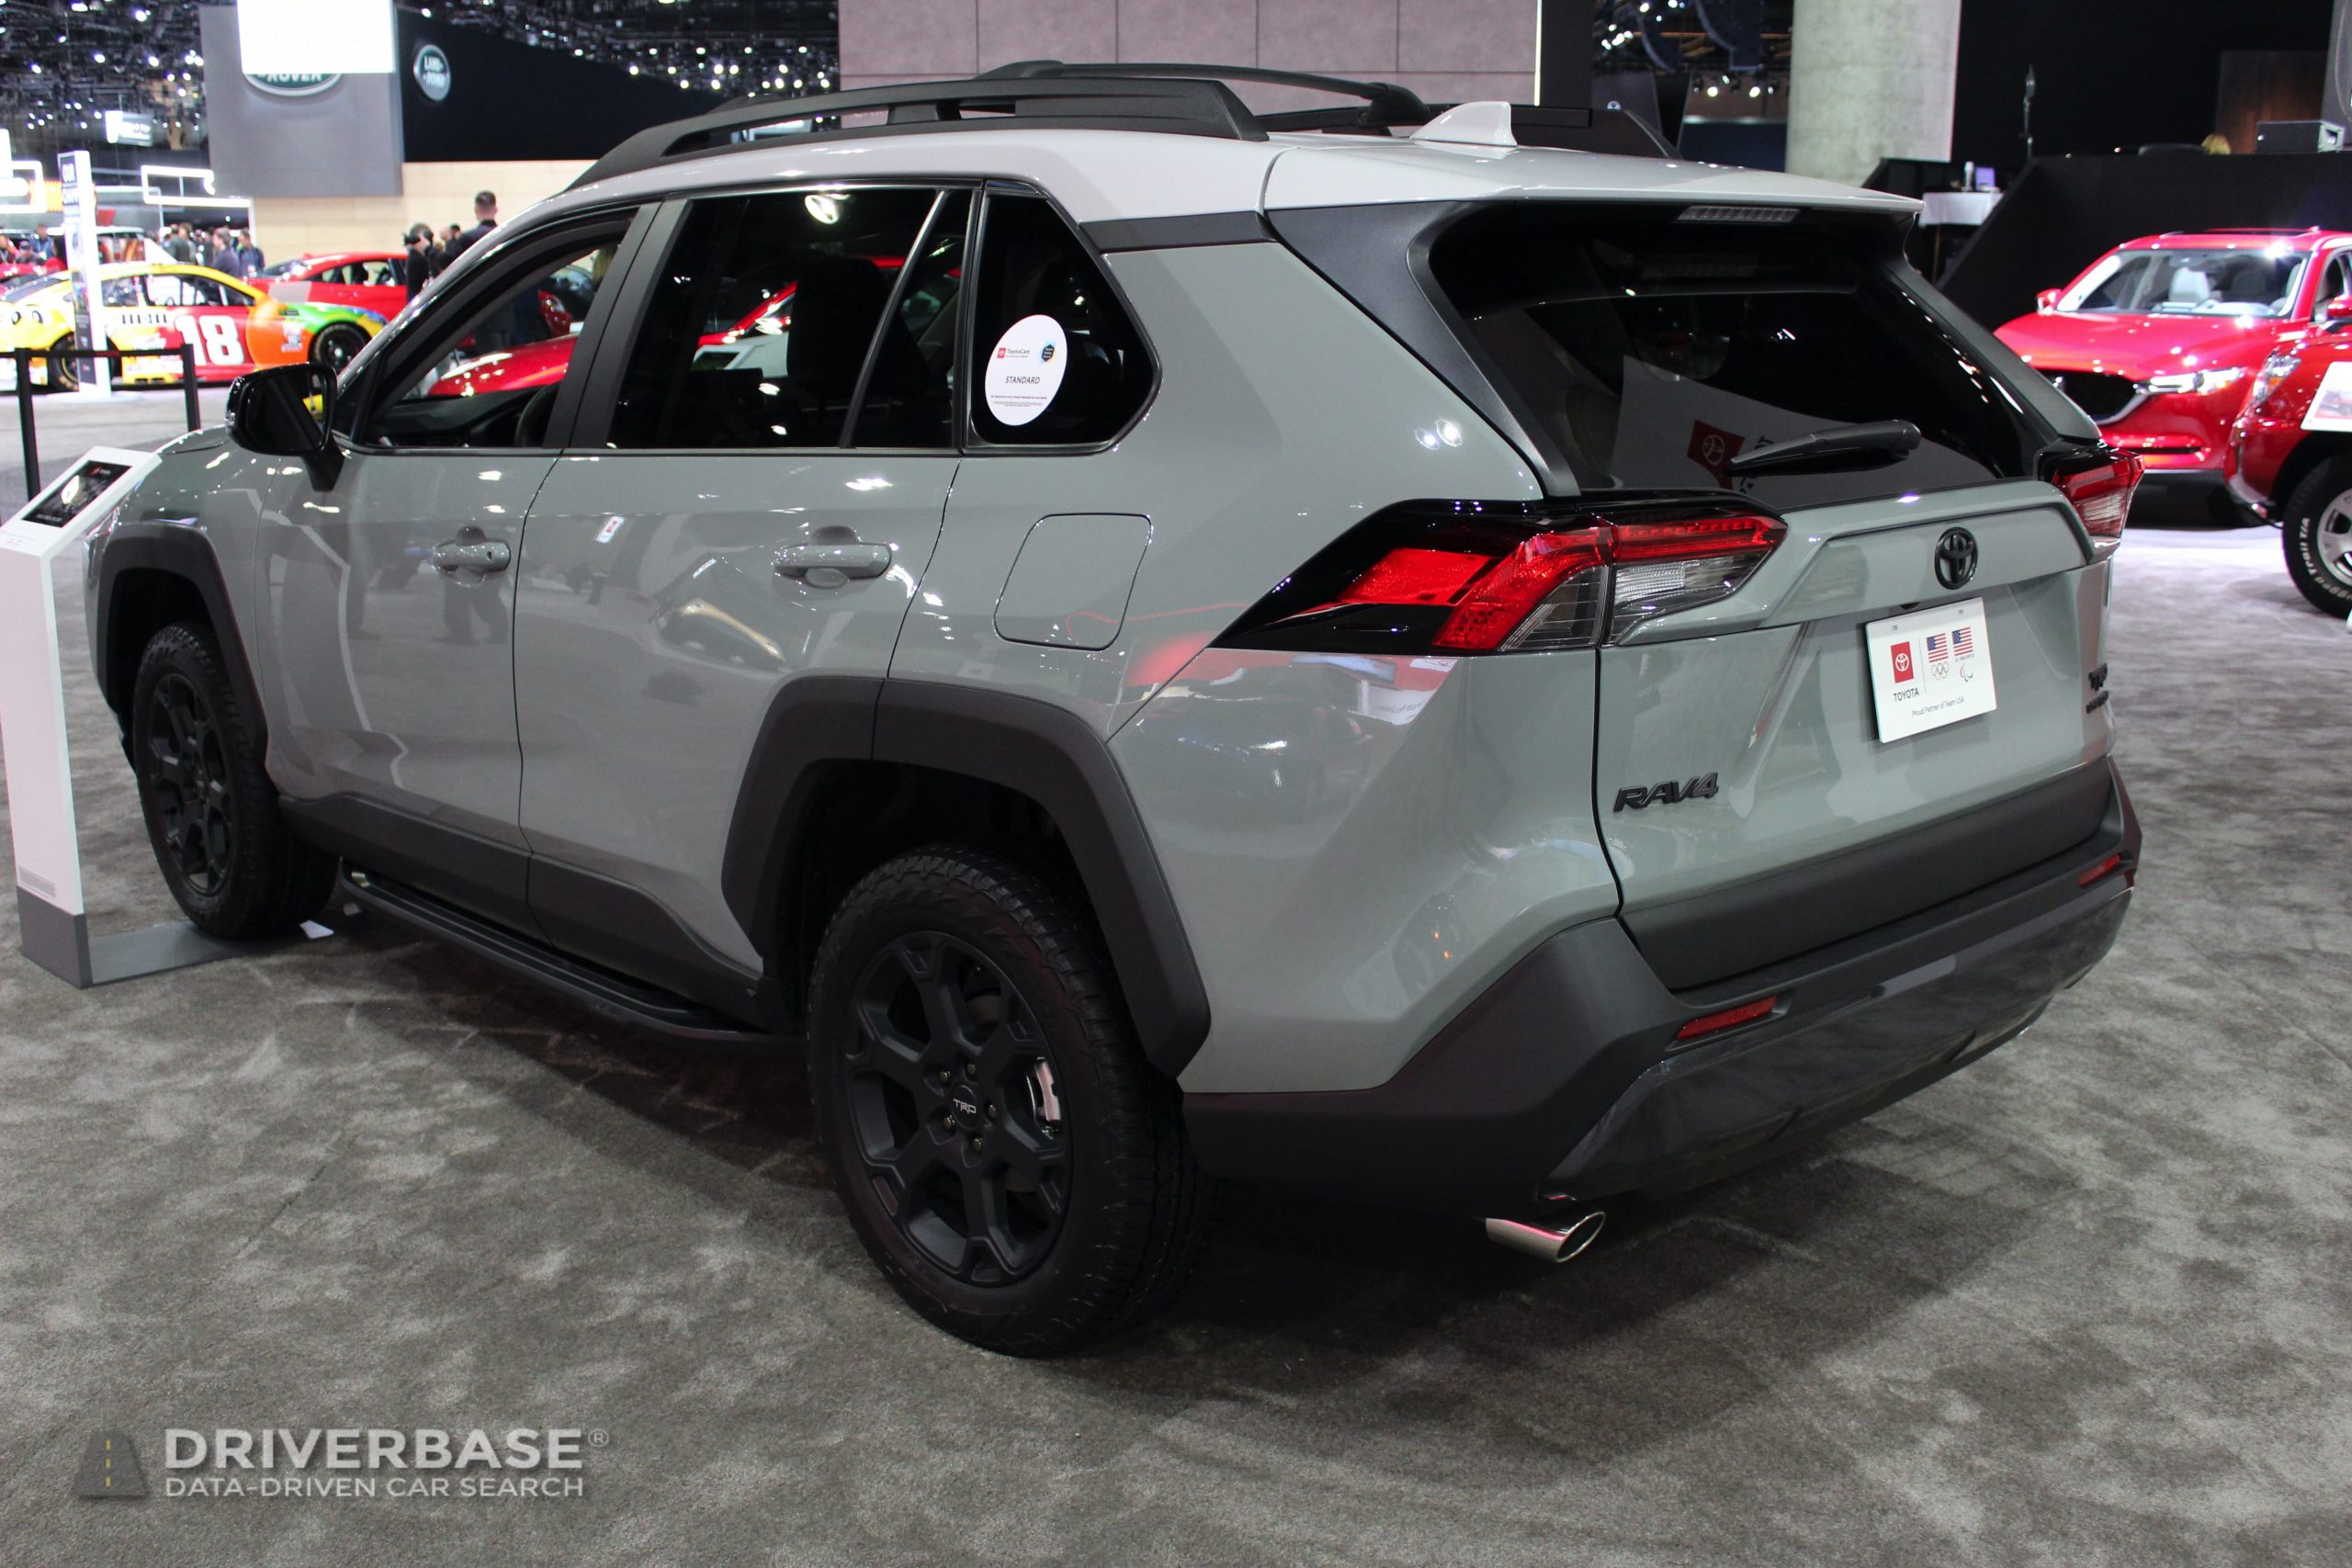 2020 Toyota RAV4 TRD Off-Road at the 2019 Los Angeles Auto Show